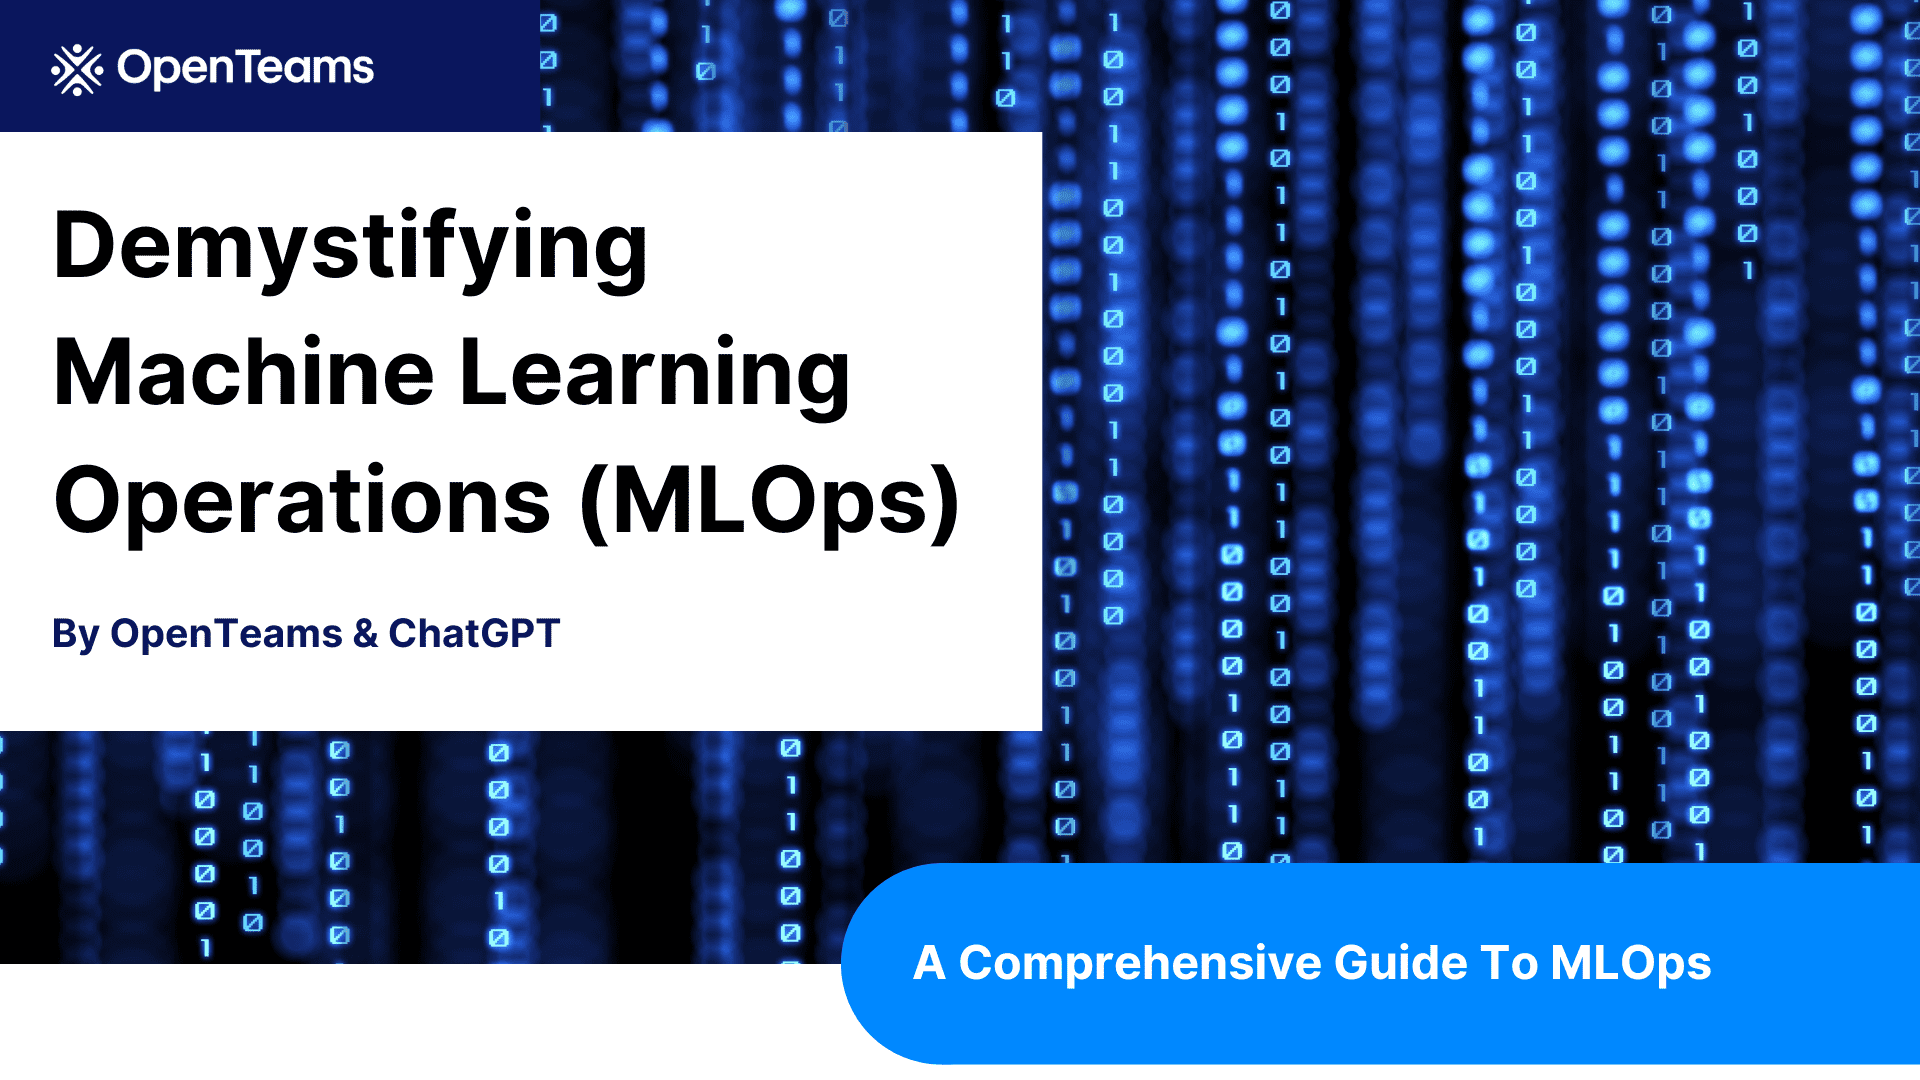 Demystifying Machine Learning Operations (MLOps): A Comprehensive Guide